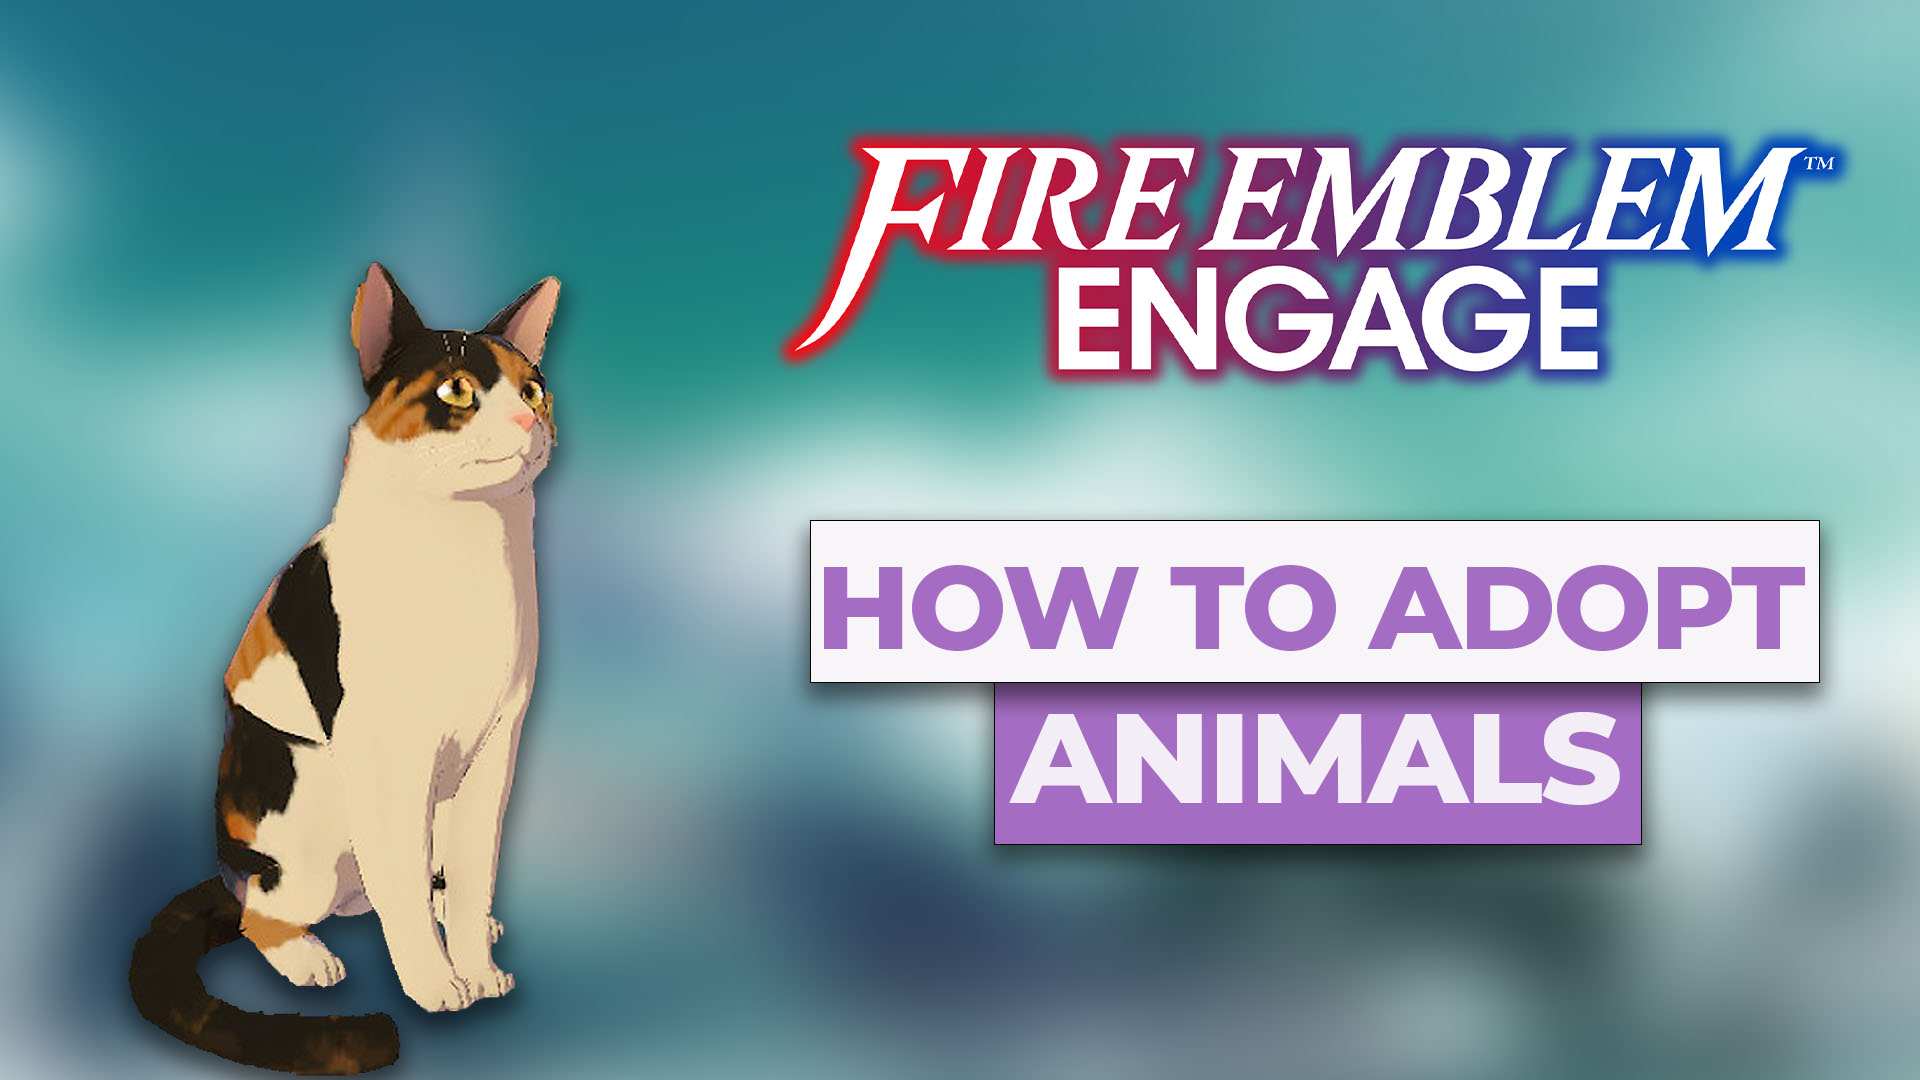 7 Best Animals To Adopt In Fire Emblem Engage